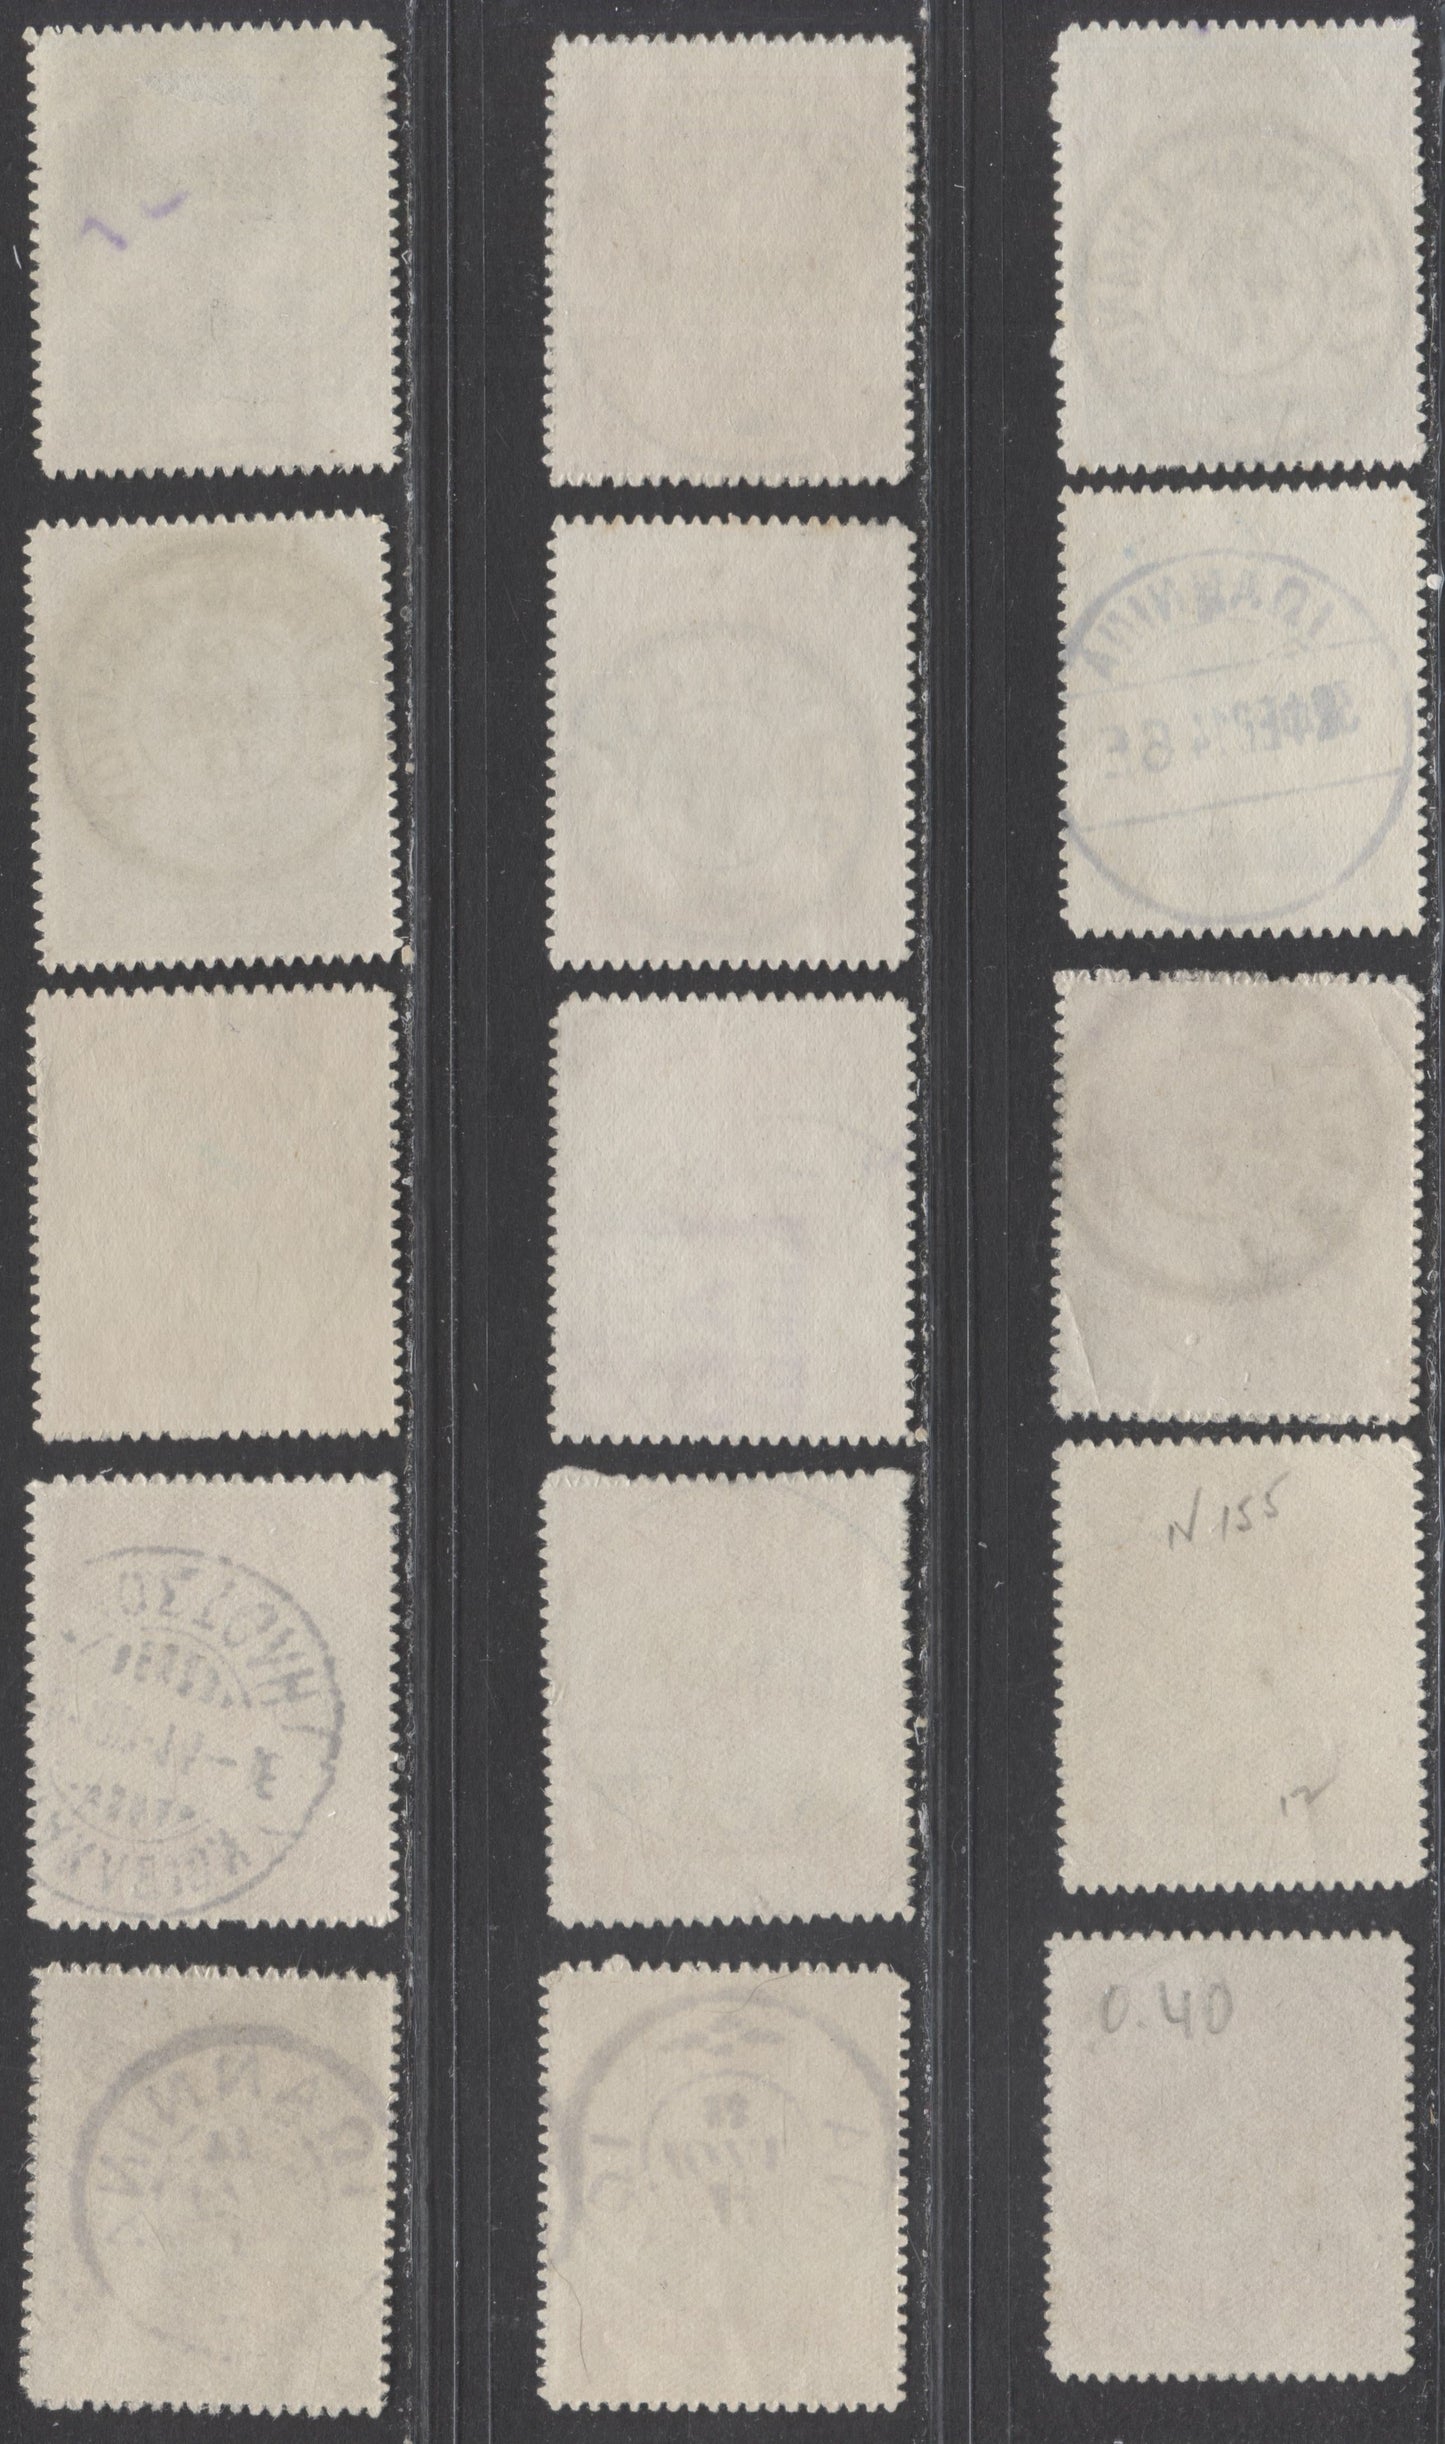 Lot 283 Greece - Occupation of Turkey SC#N150A-N162 1912 Cross Of Constantine & Eagle Of Zeus Issues, A F/VF Used Range Of Singles, Selected for SON Cancels, 2022 Scott Classic Cat. $15 USD, Click on Listing to See ALL Pictures